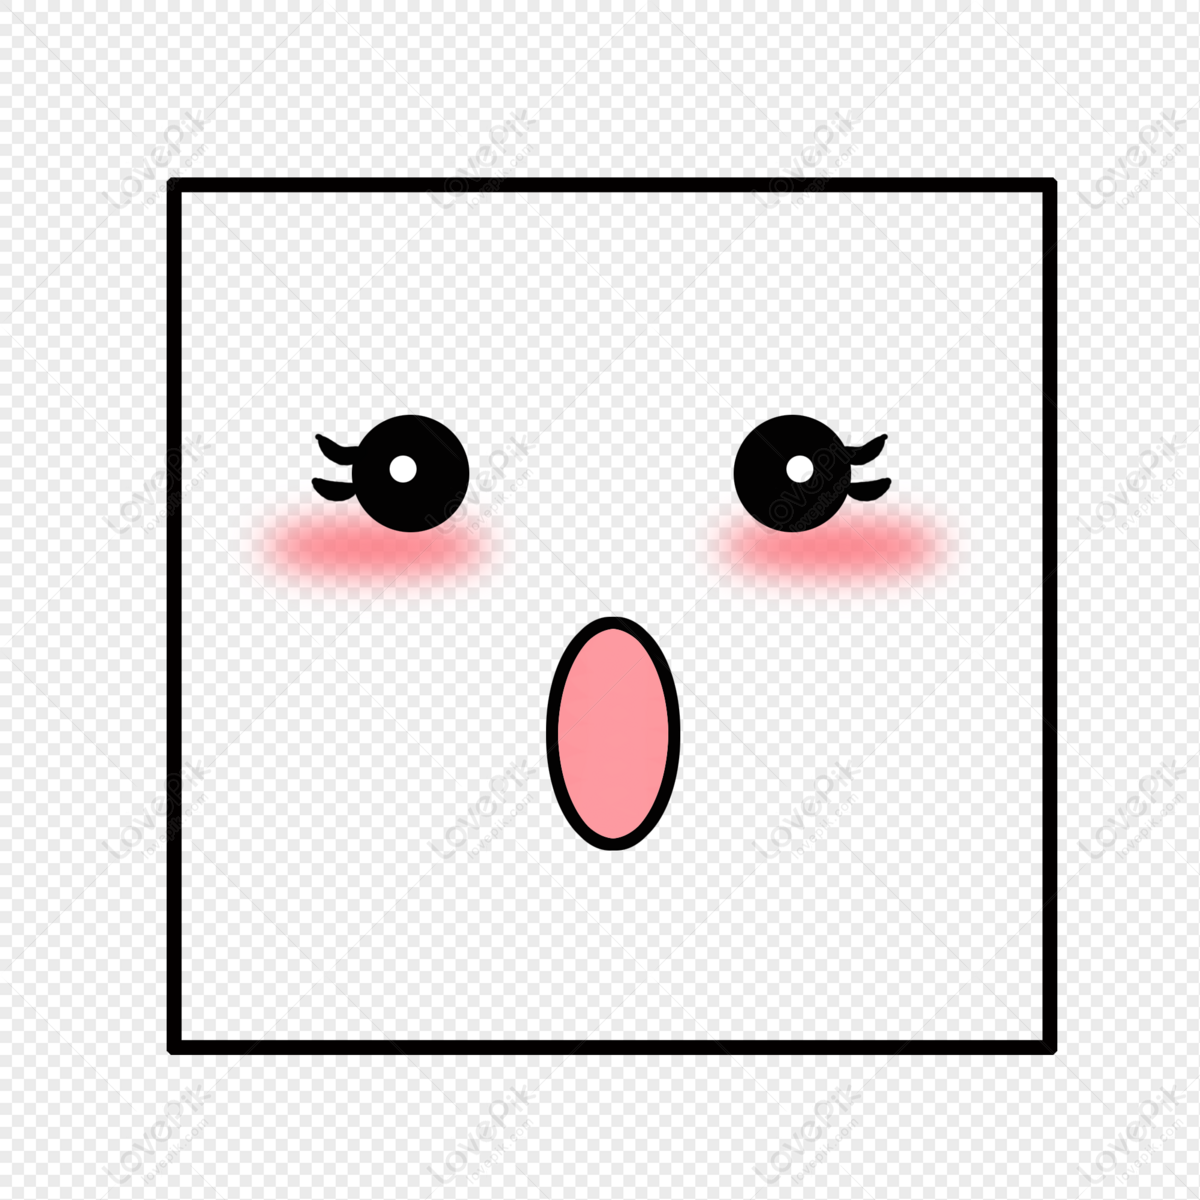 Surprised Little Expression Free PNG And Clipart Image For Free